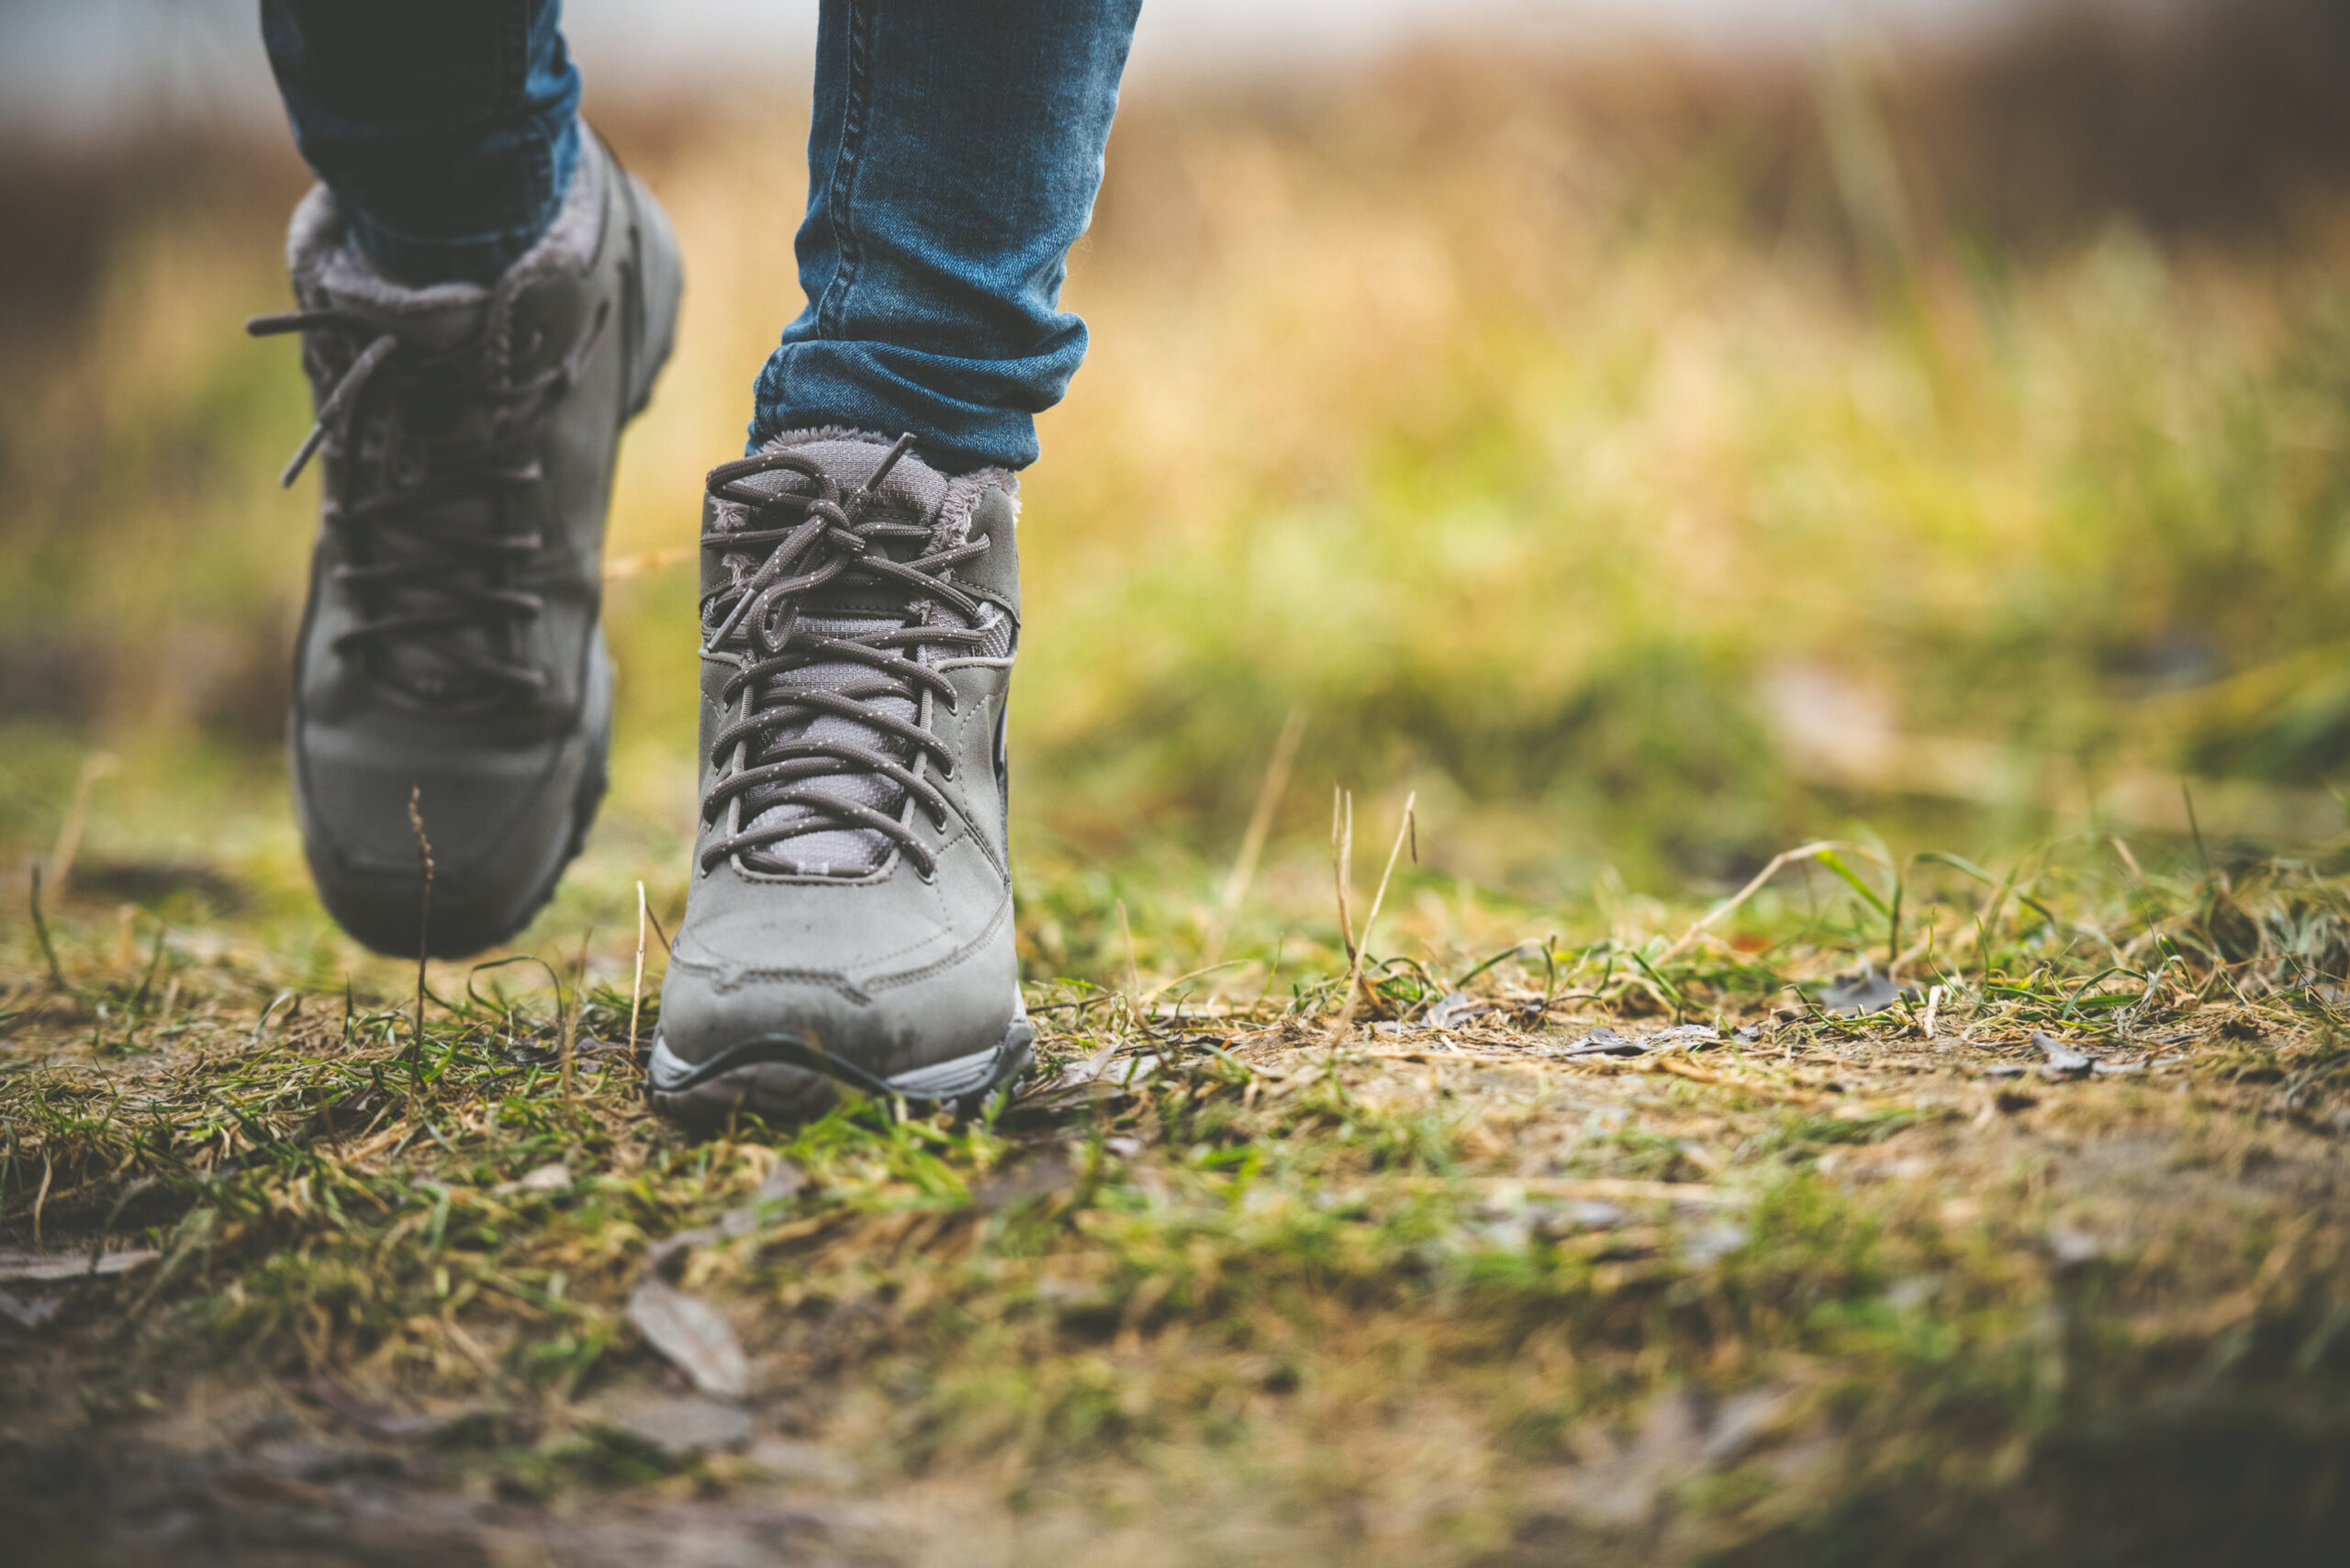 A close up of hiking boots on a person walking on a forest path.